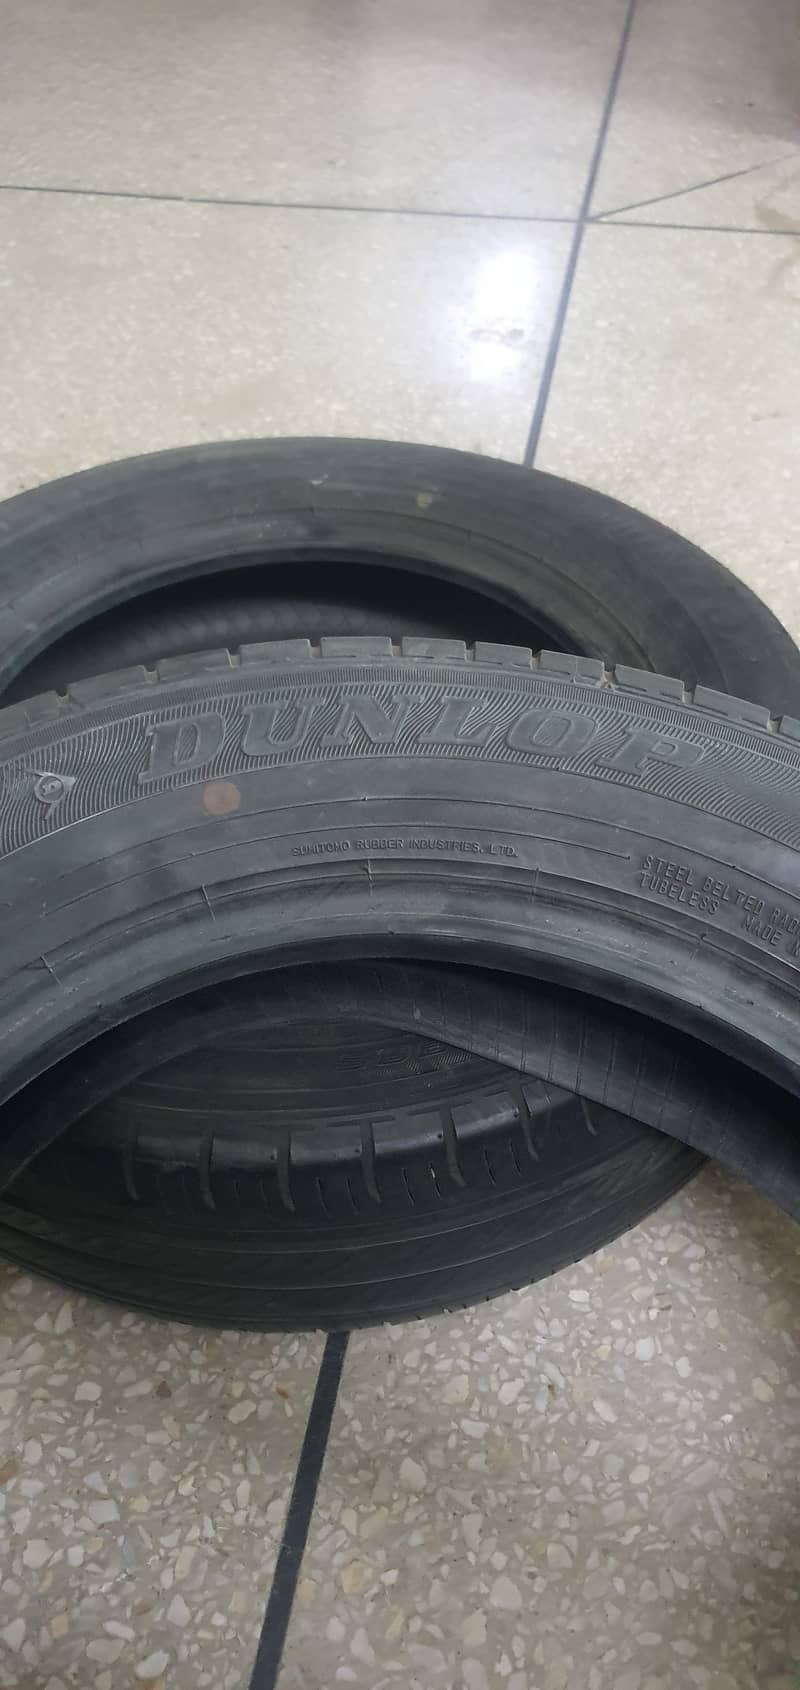 New Dunlop Tyres 5